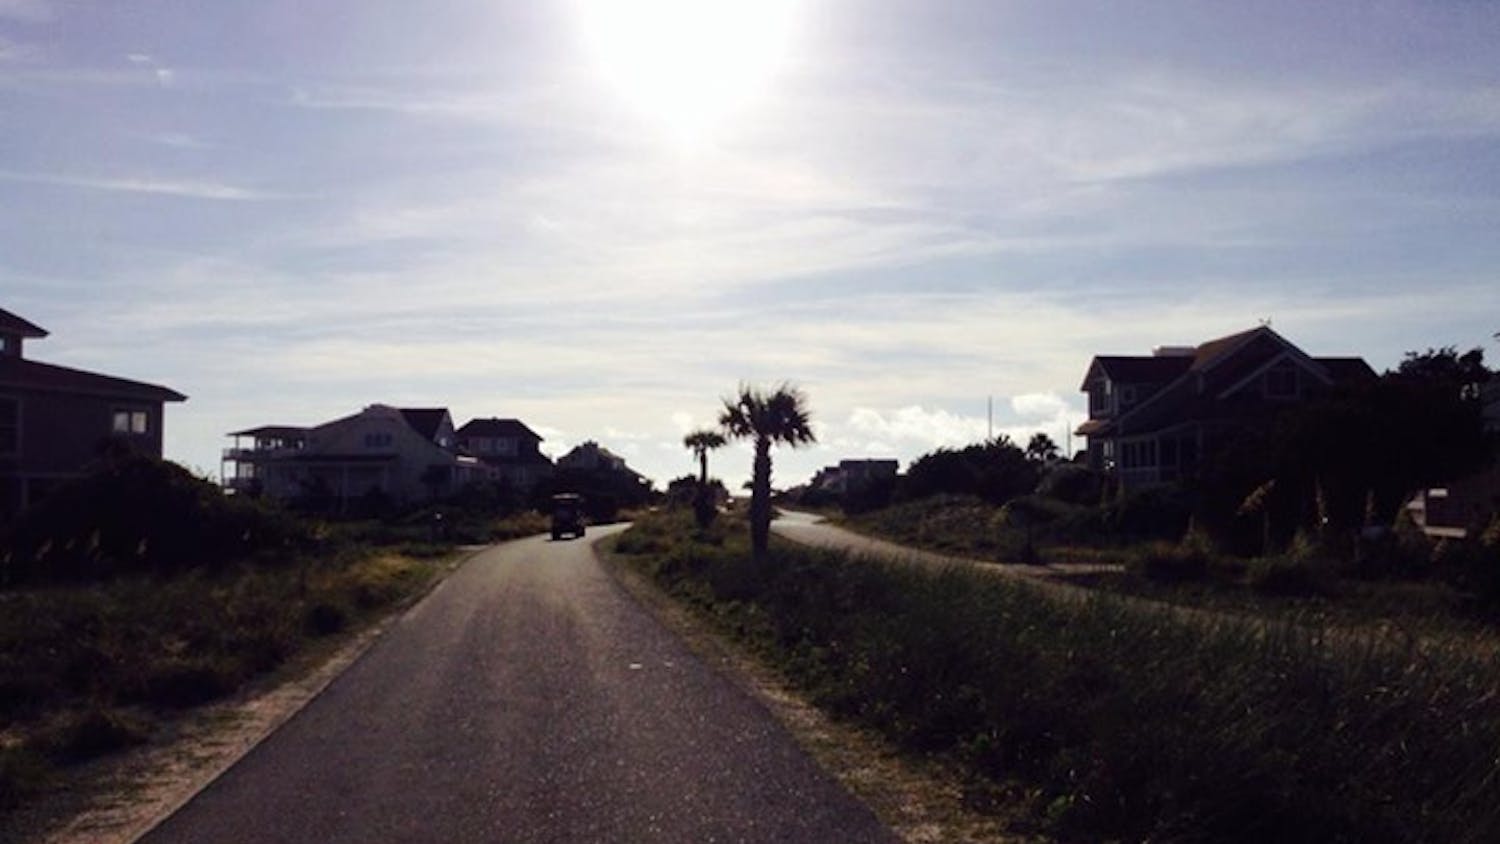 This is the view from a road in Bald Head Island where only golf carts, bikes and pedestrians can roam.&nbsp;